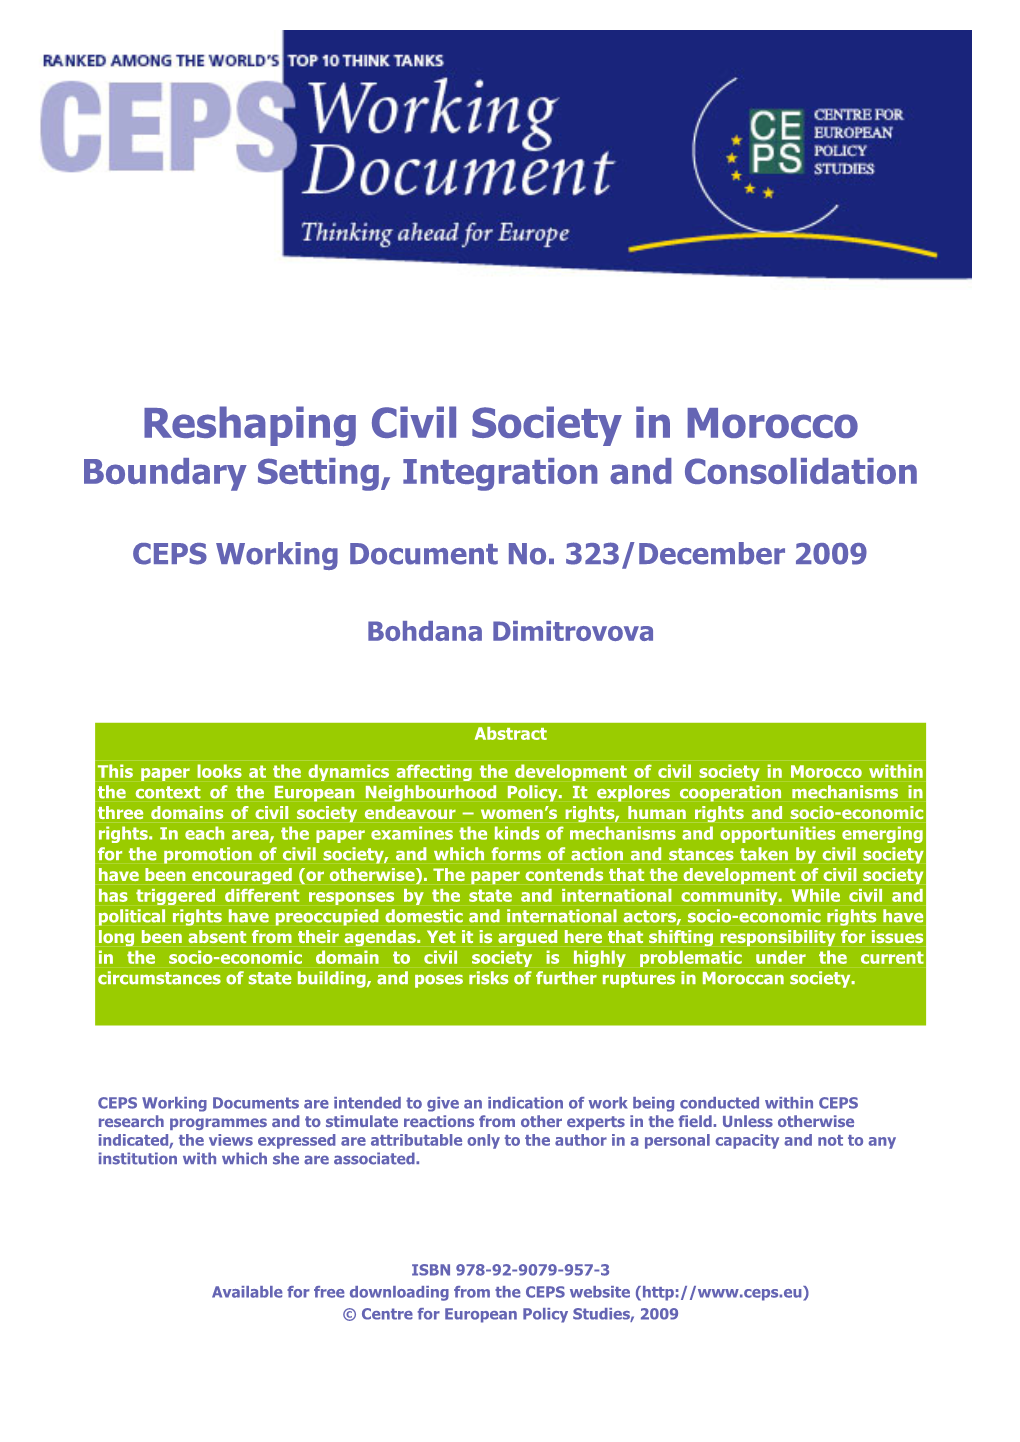 Reshaping Civil Society in Morocco Boundary Setting, Integration and Consolidation